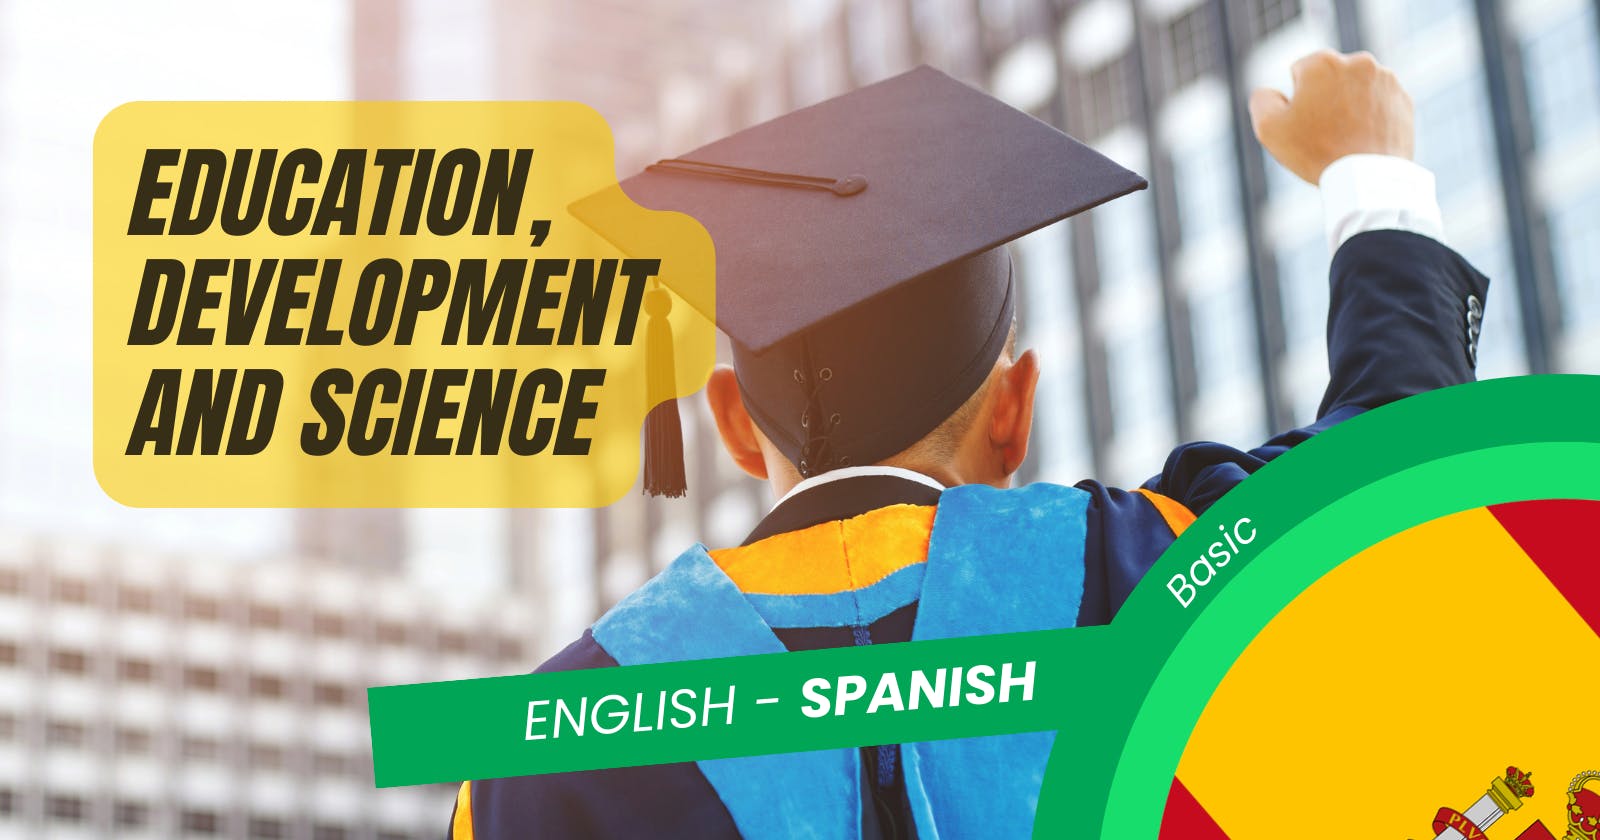 🇪🇸 Learn Spanish for Academic Purposes: 
Basic Words for Education and Science